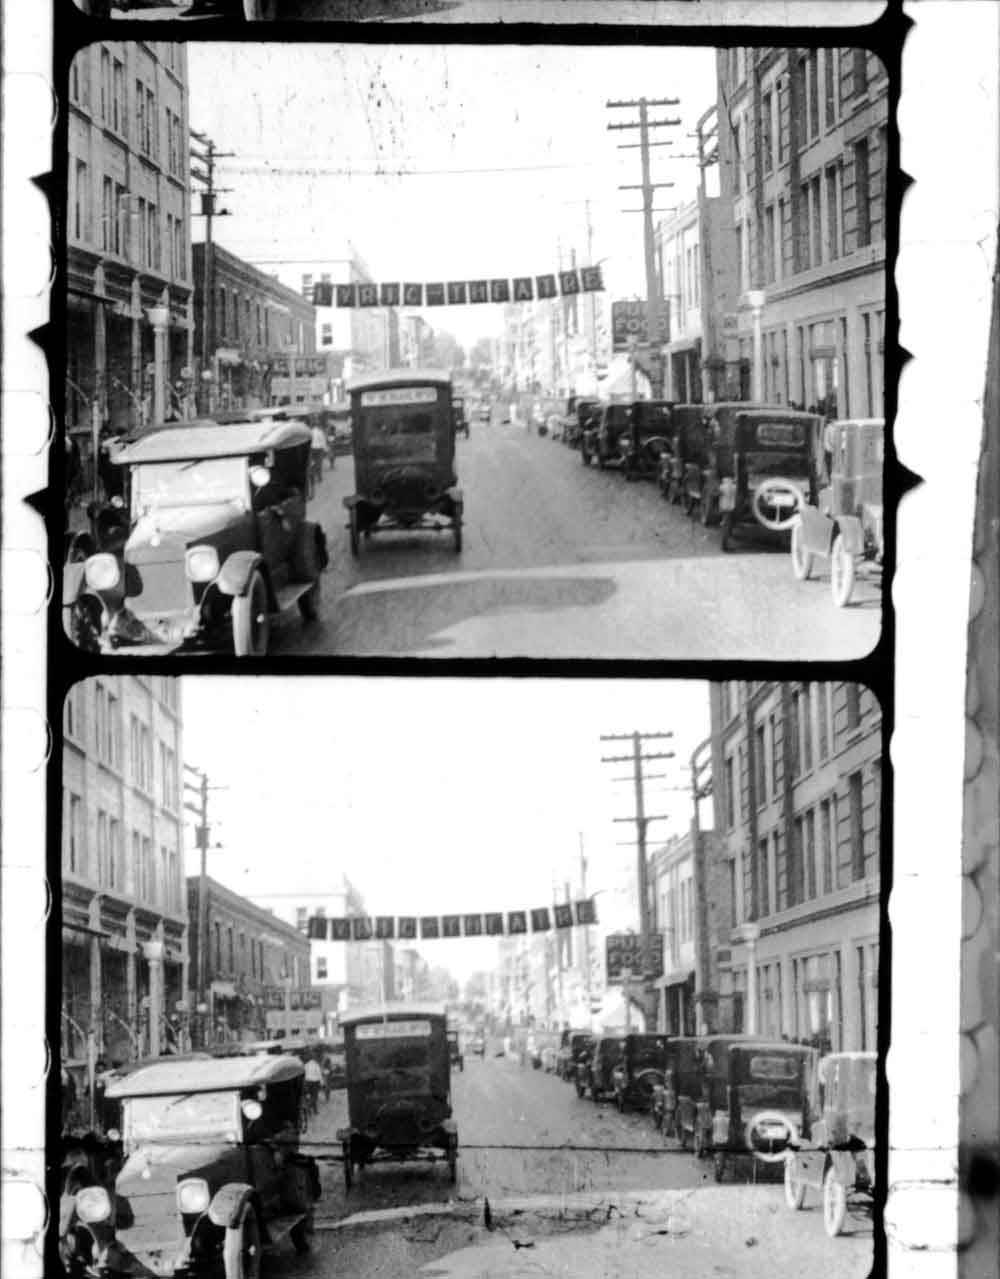 (RAC.2010.07.82) - View North on Robinson from Main, stills from 35mm newsreel,